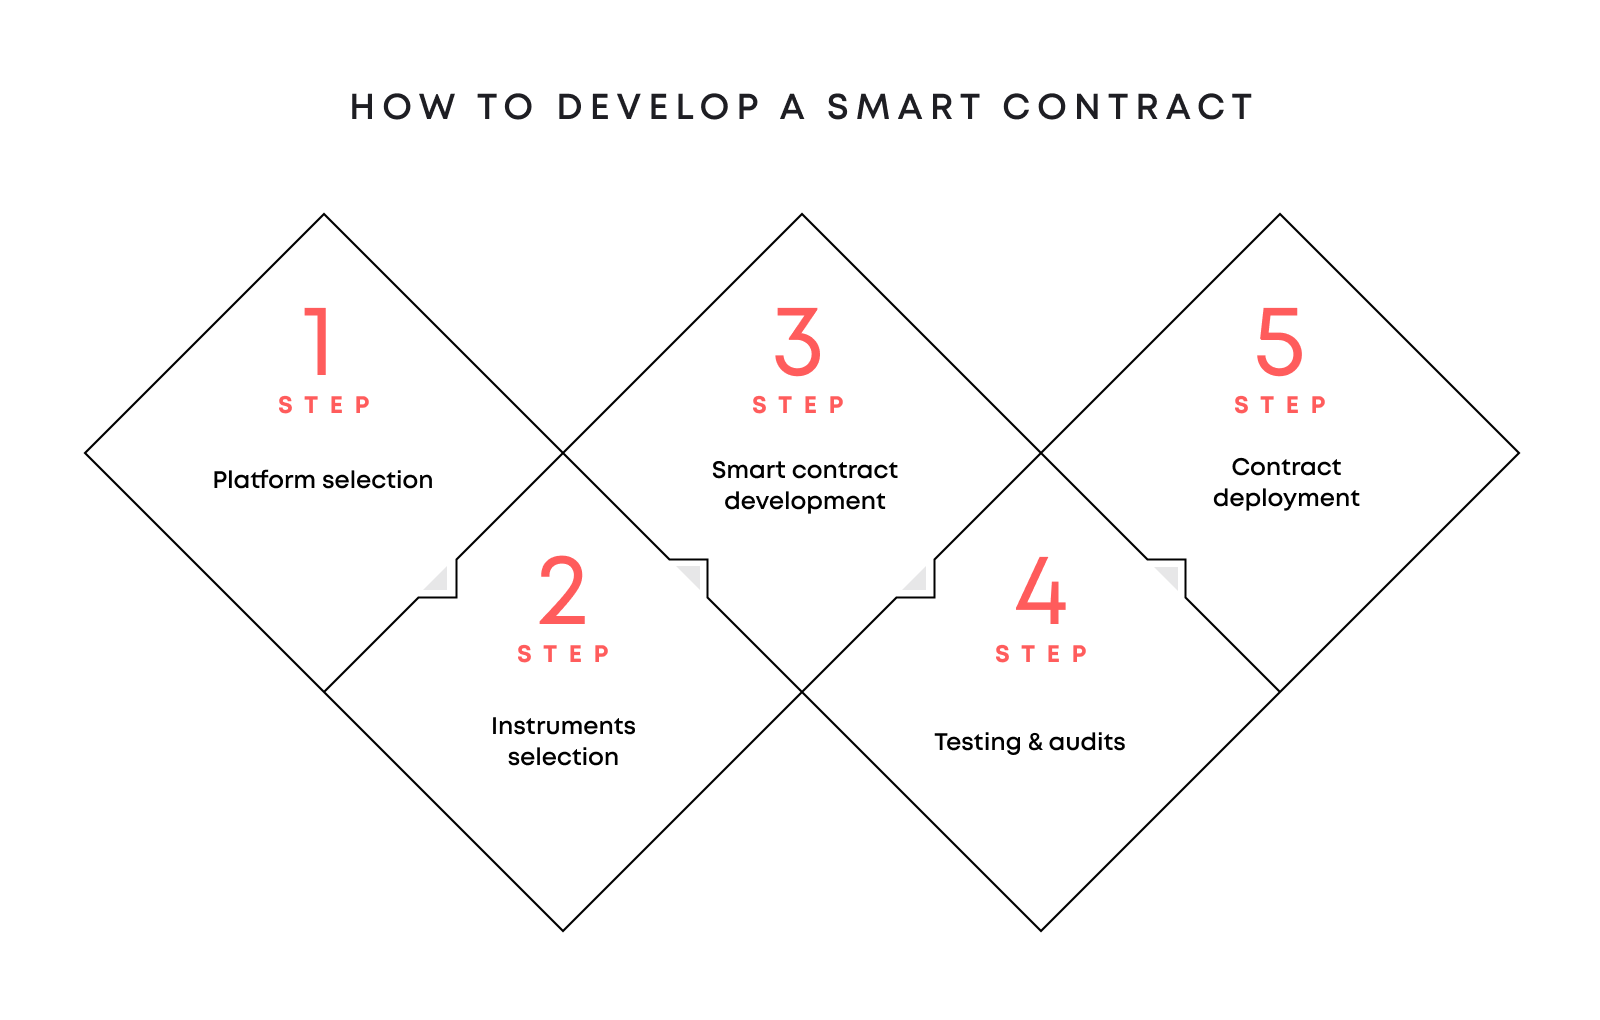 How to develop a smart contract step by step